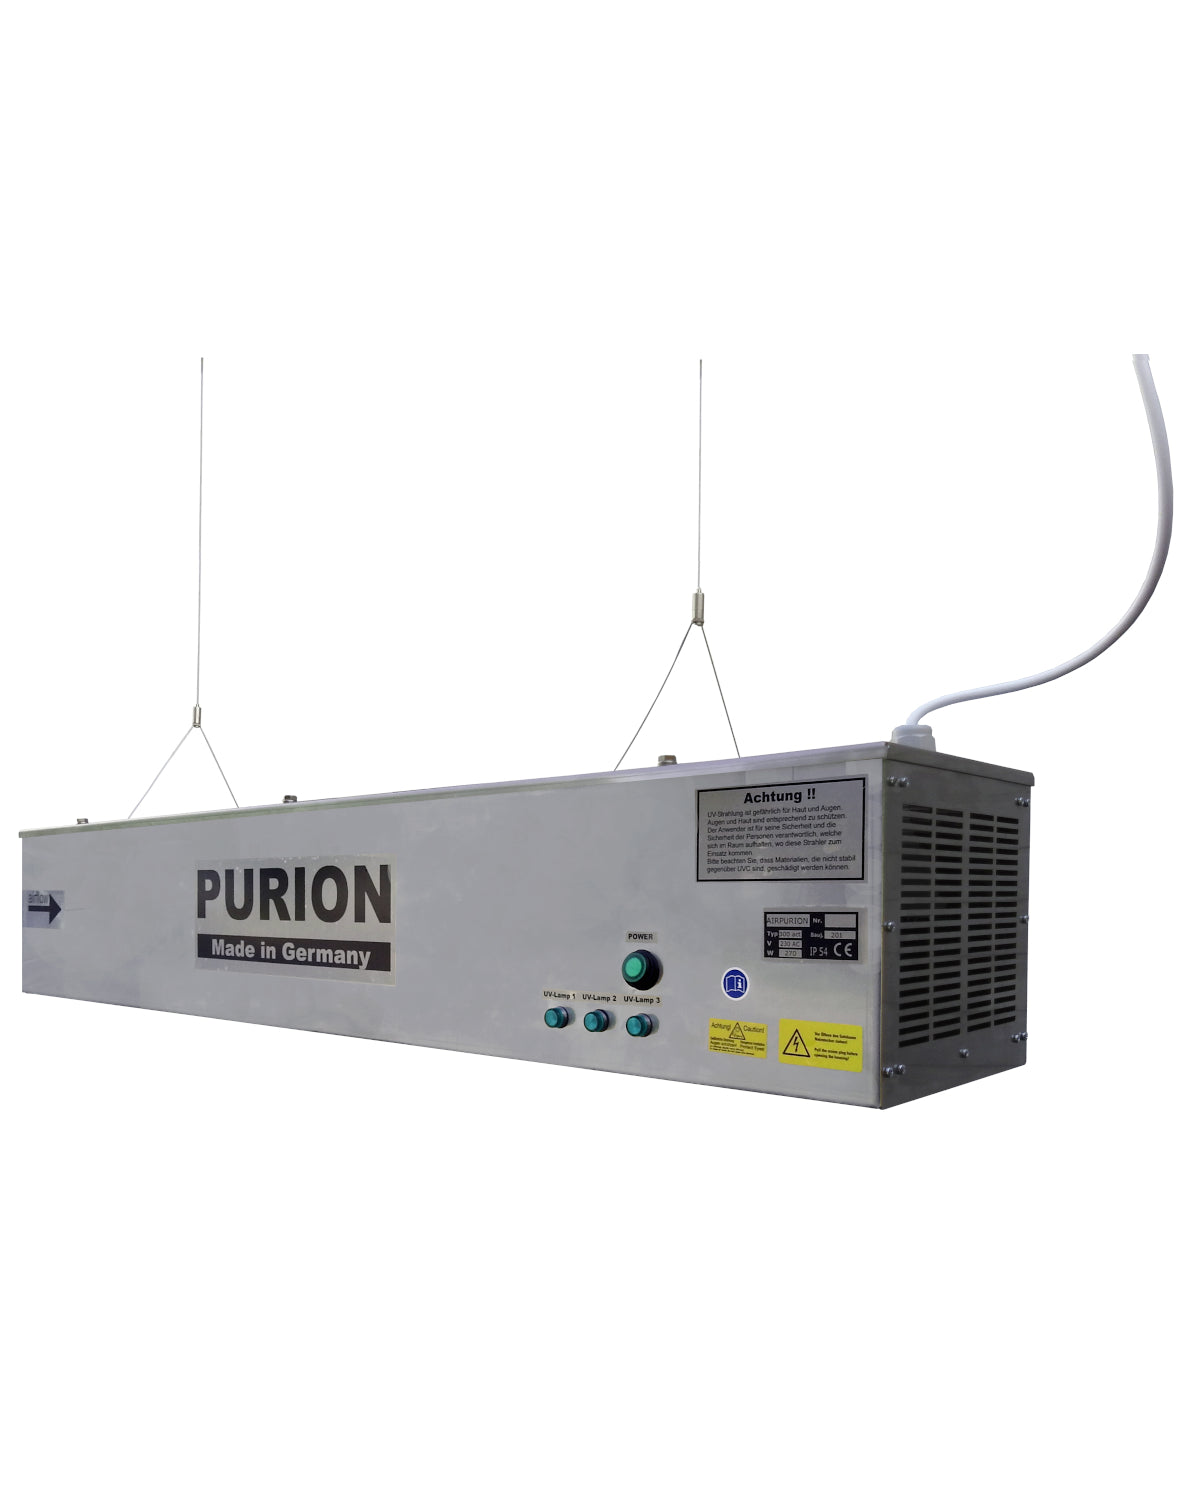 AIRPURION 300 active silent